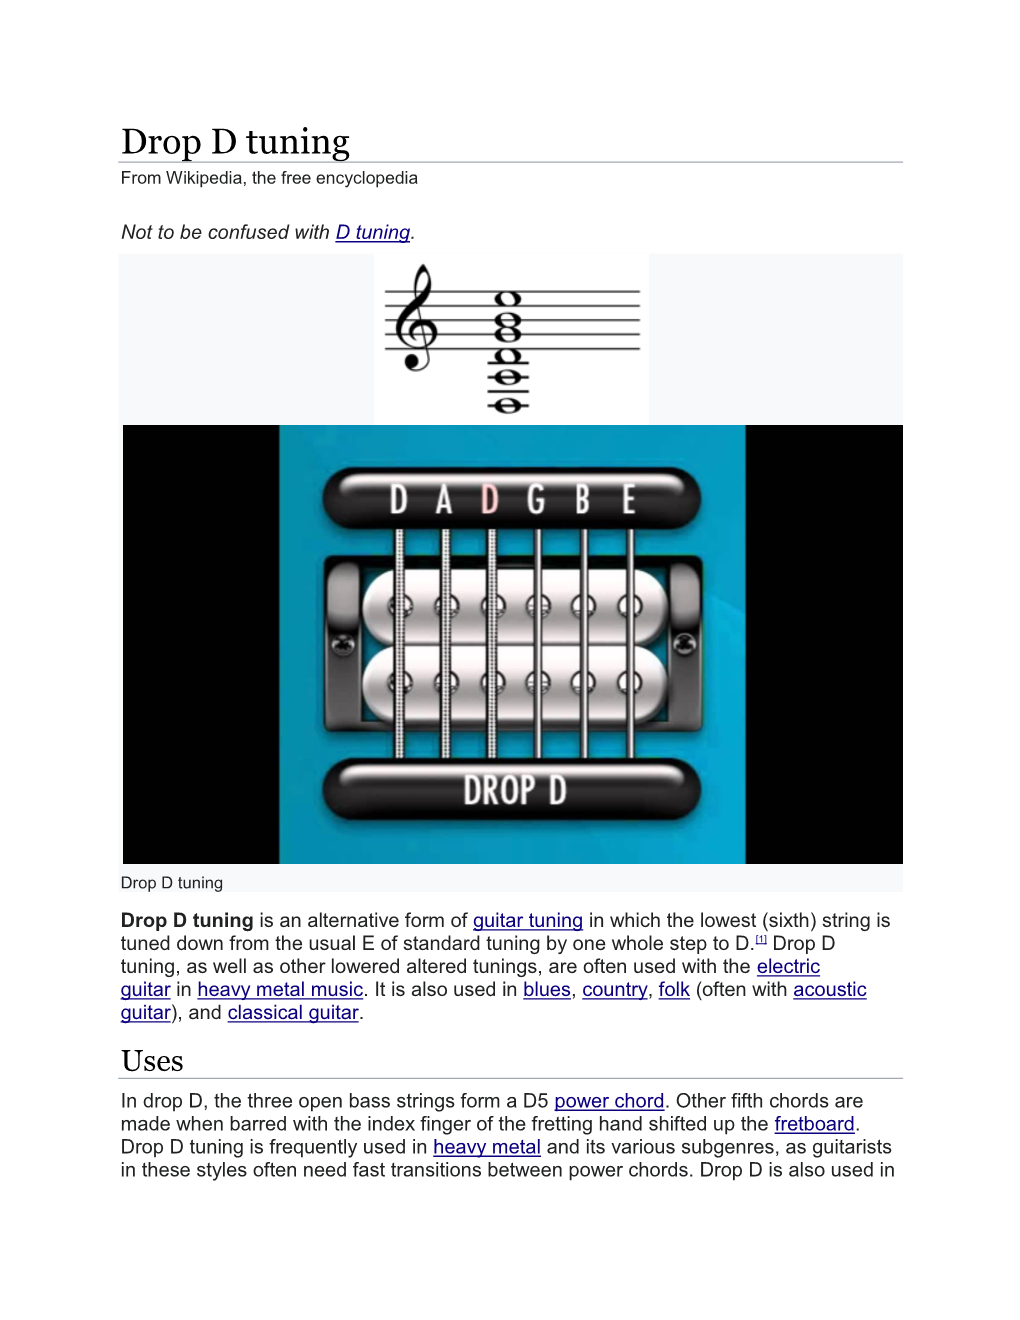 Drop D Tuning from Wikipedia, the Free Encyclopedia